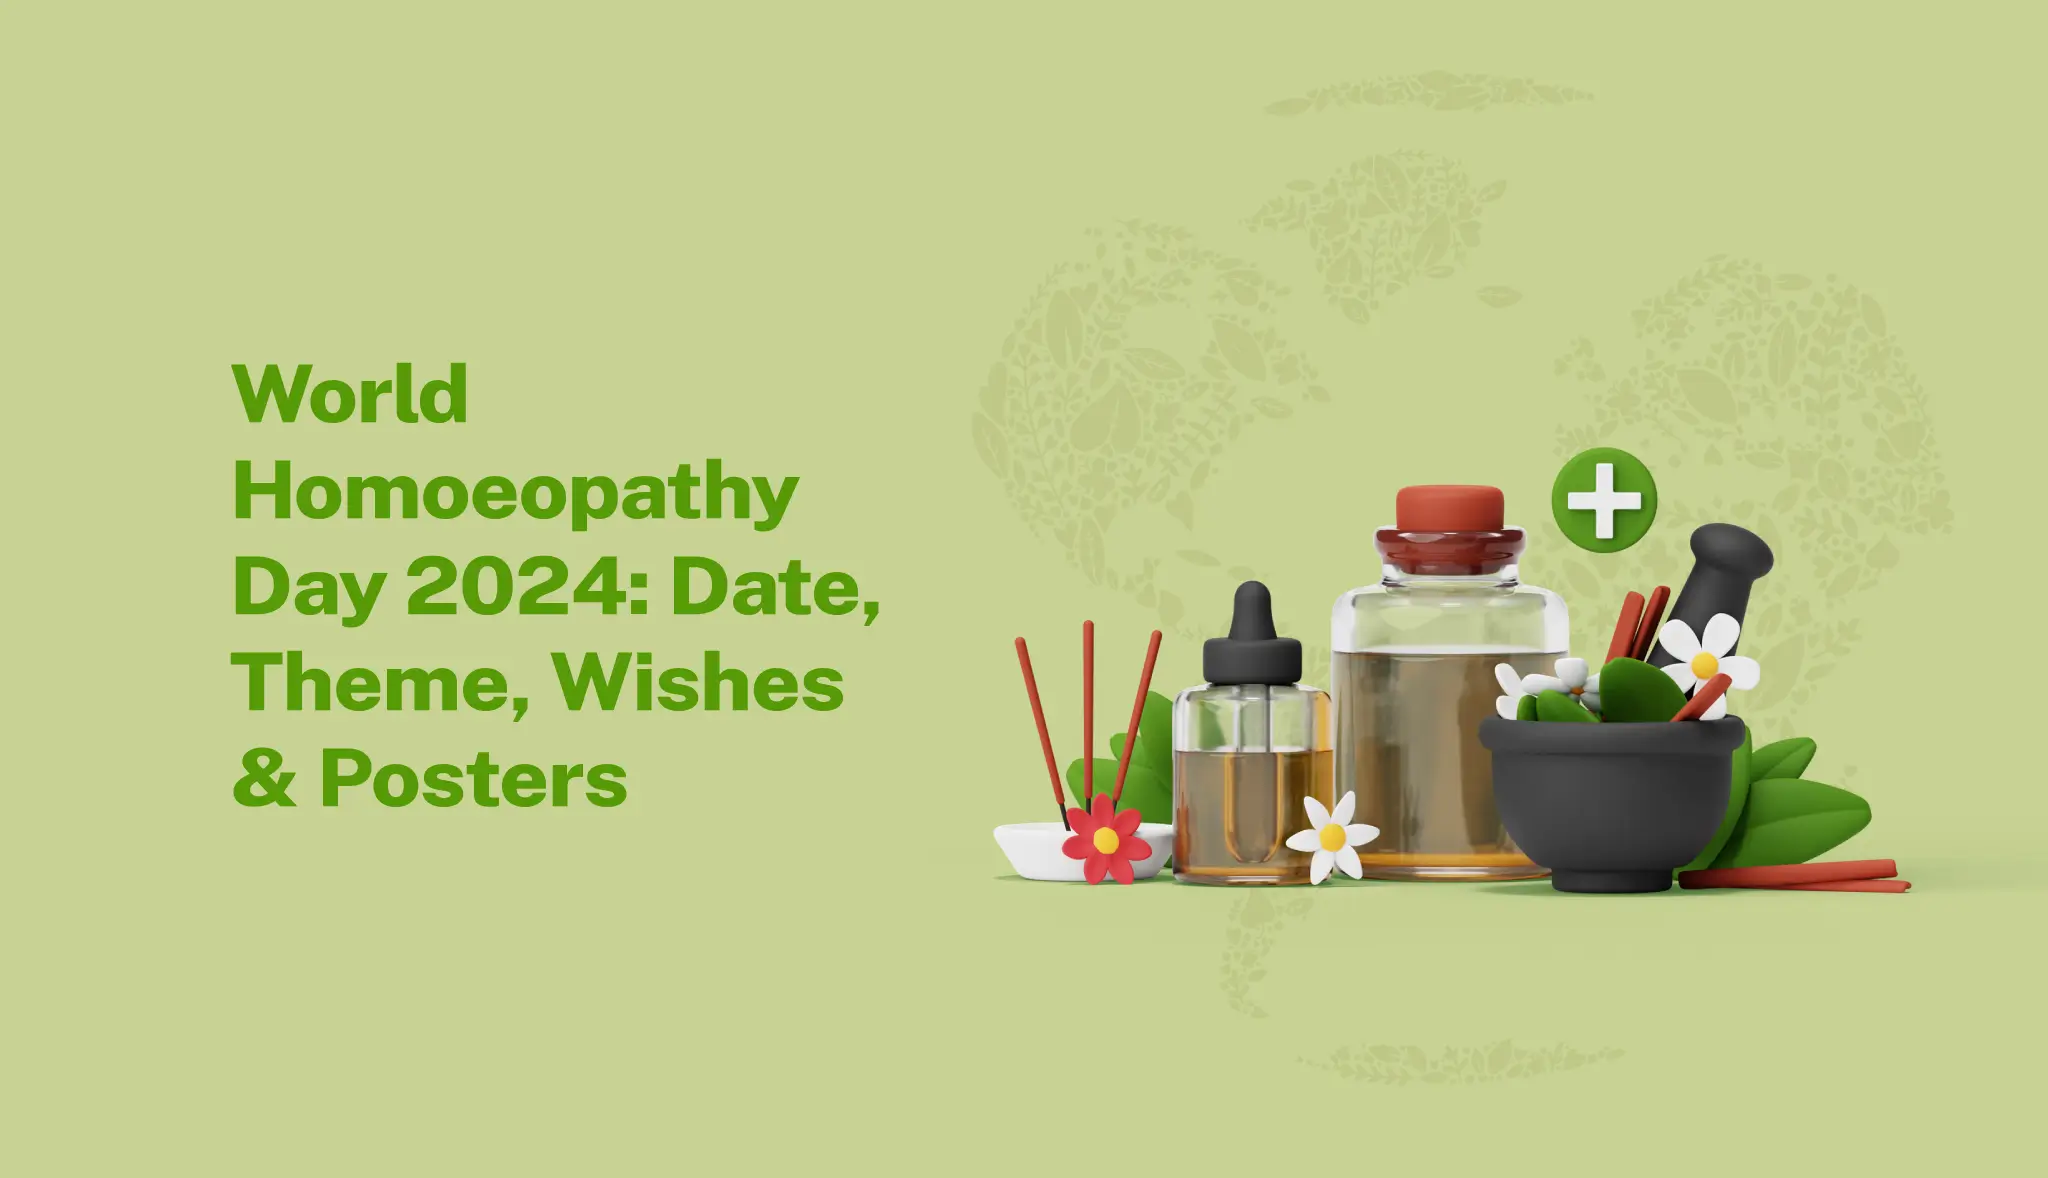 World Homoeopathy Day 2024: Date, Theme, Wishes & Posters - Postive